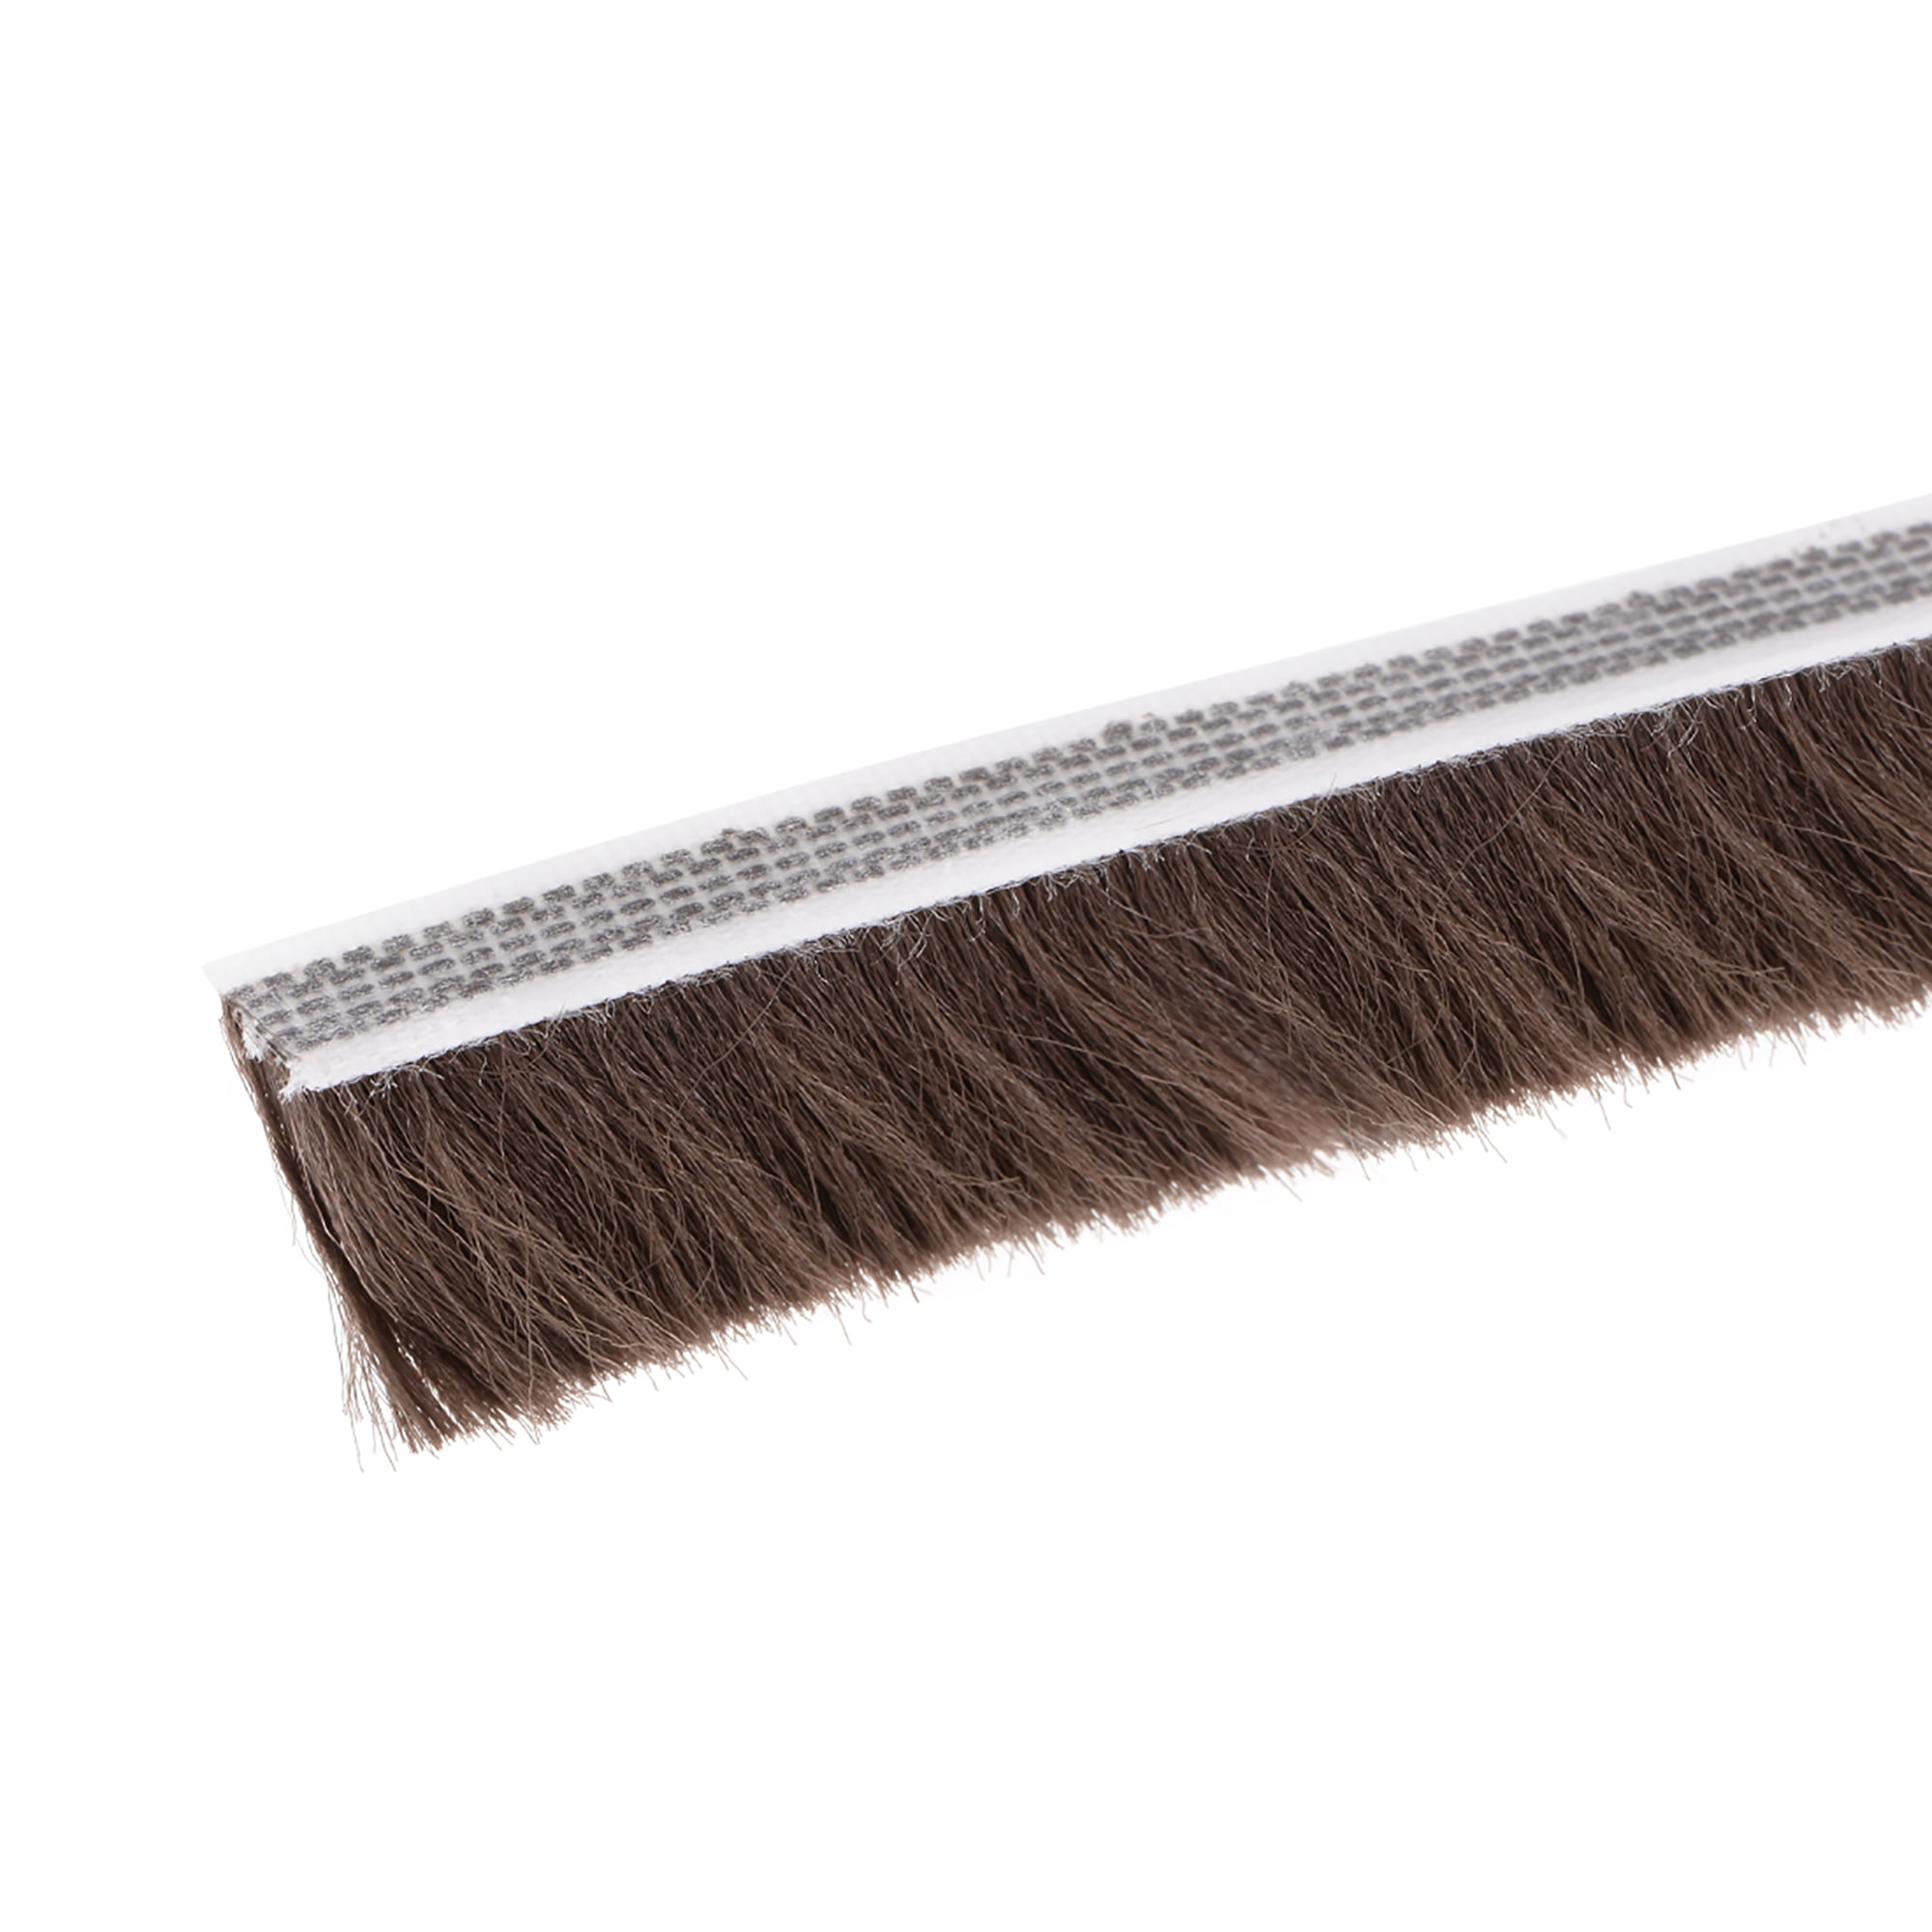 H-density Felt Draught Excluder Wool Pile Weather Strip Adhesive Brush for Sliding Sash Window Door Seals 9 x 9mm 3/8-inch x 3/8-inch 10MTS 32.8-Feet Gray